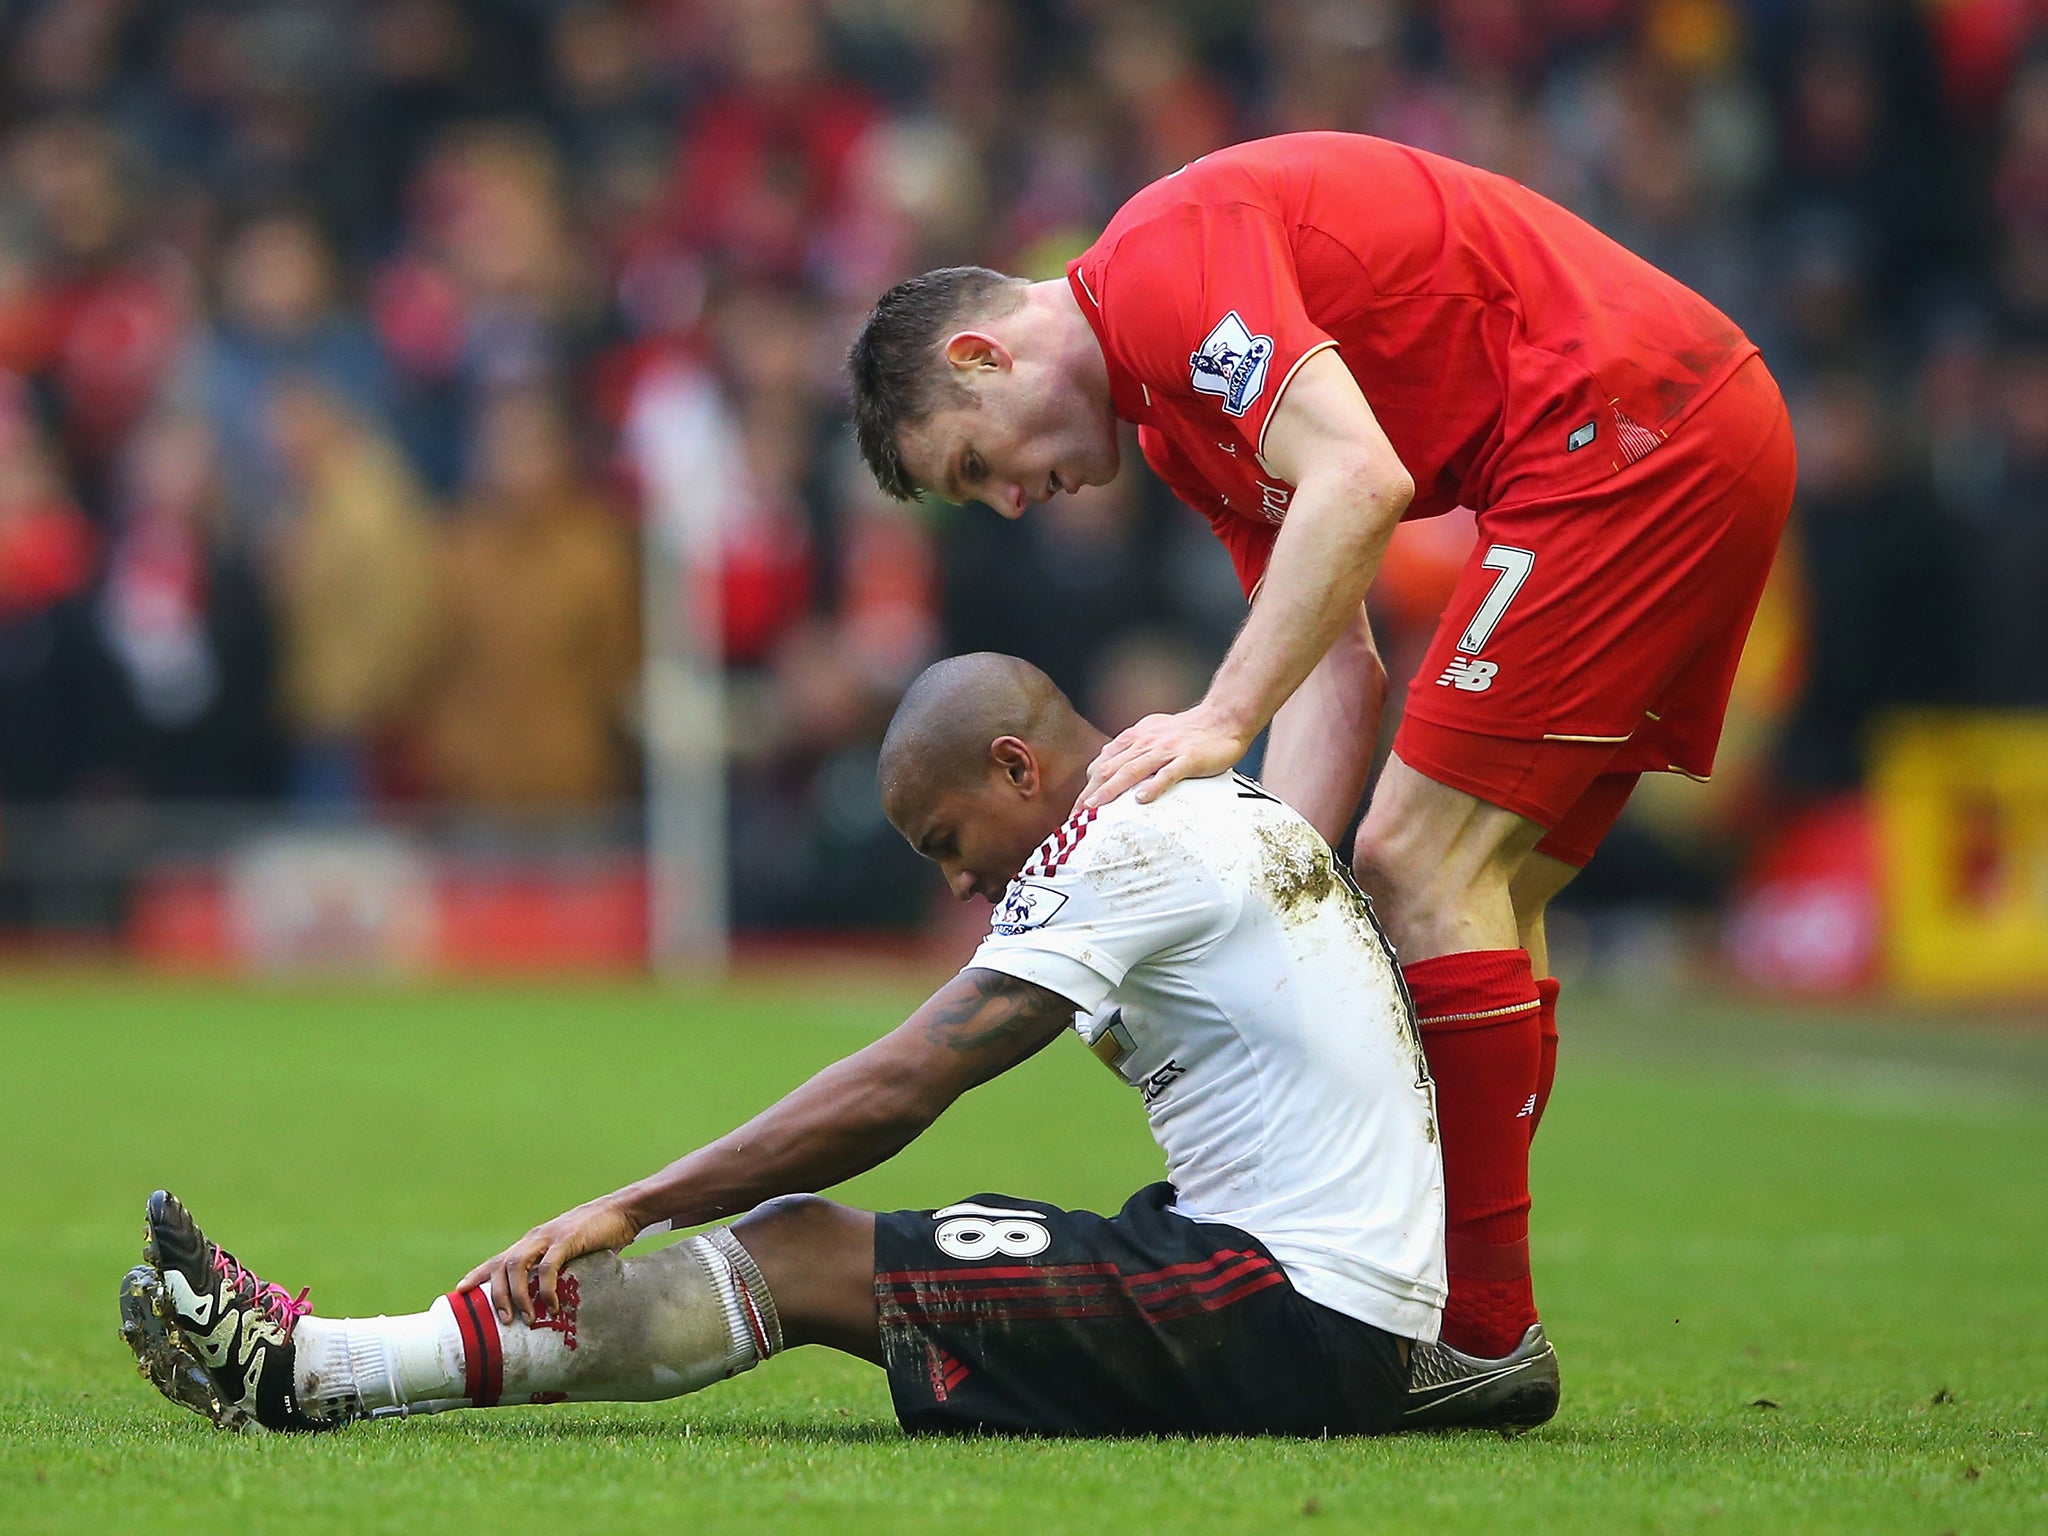 Ashley Young of Manchester United reacts after a challenge by James Milner of Liverpool during the Barclays Premier League match between Liverpool and Manchester